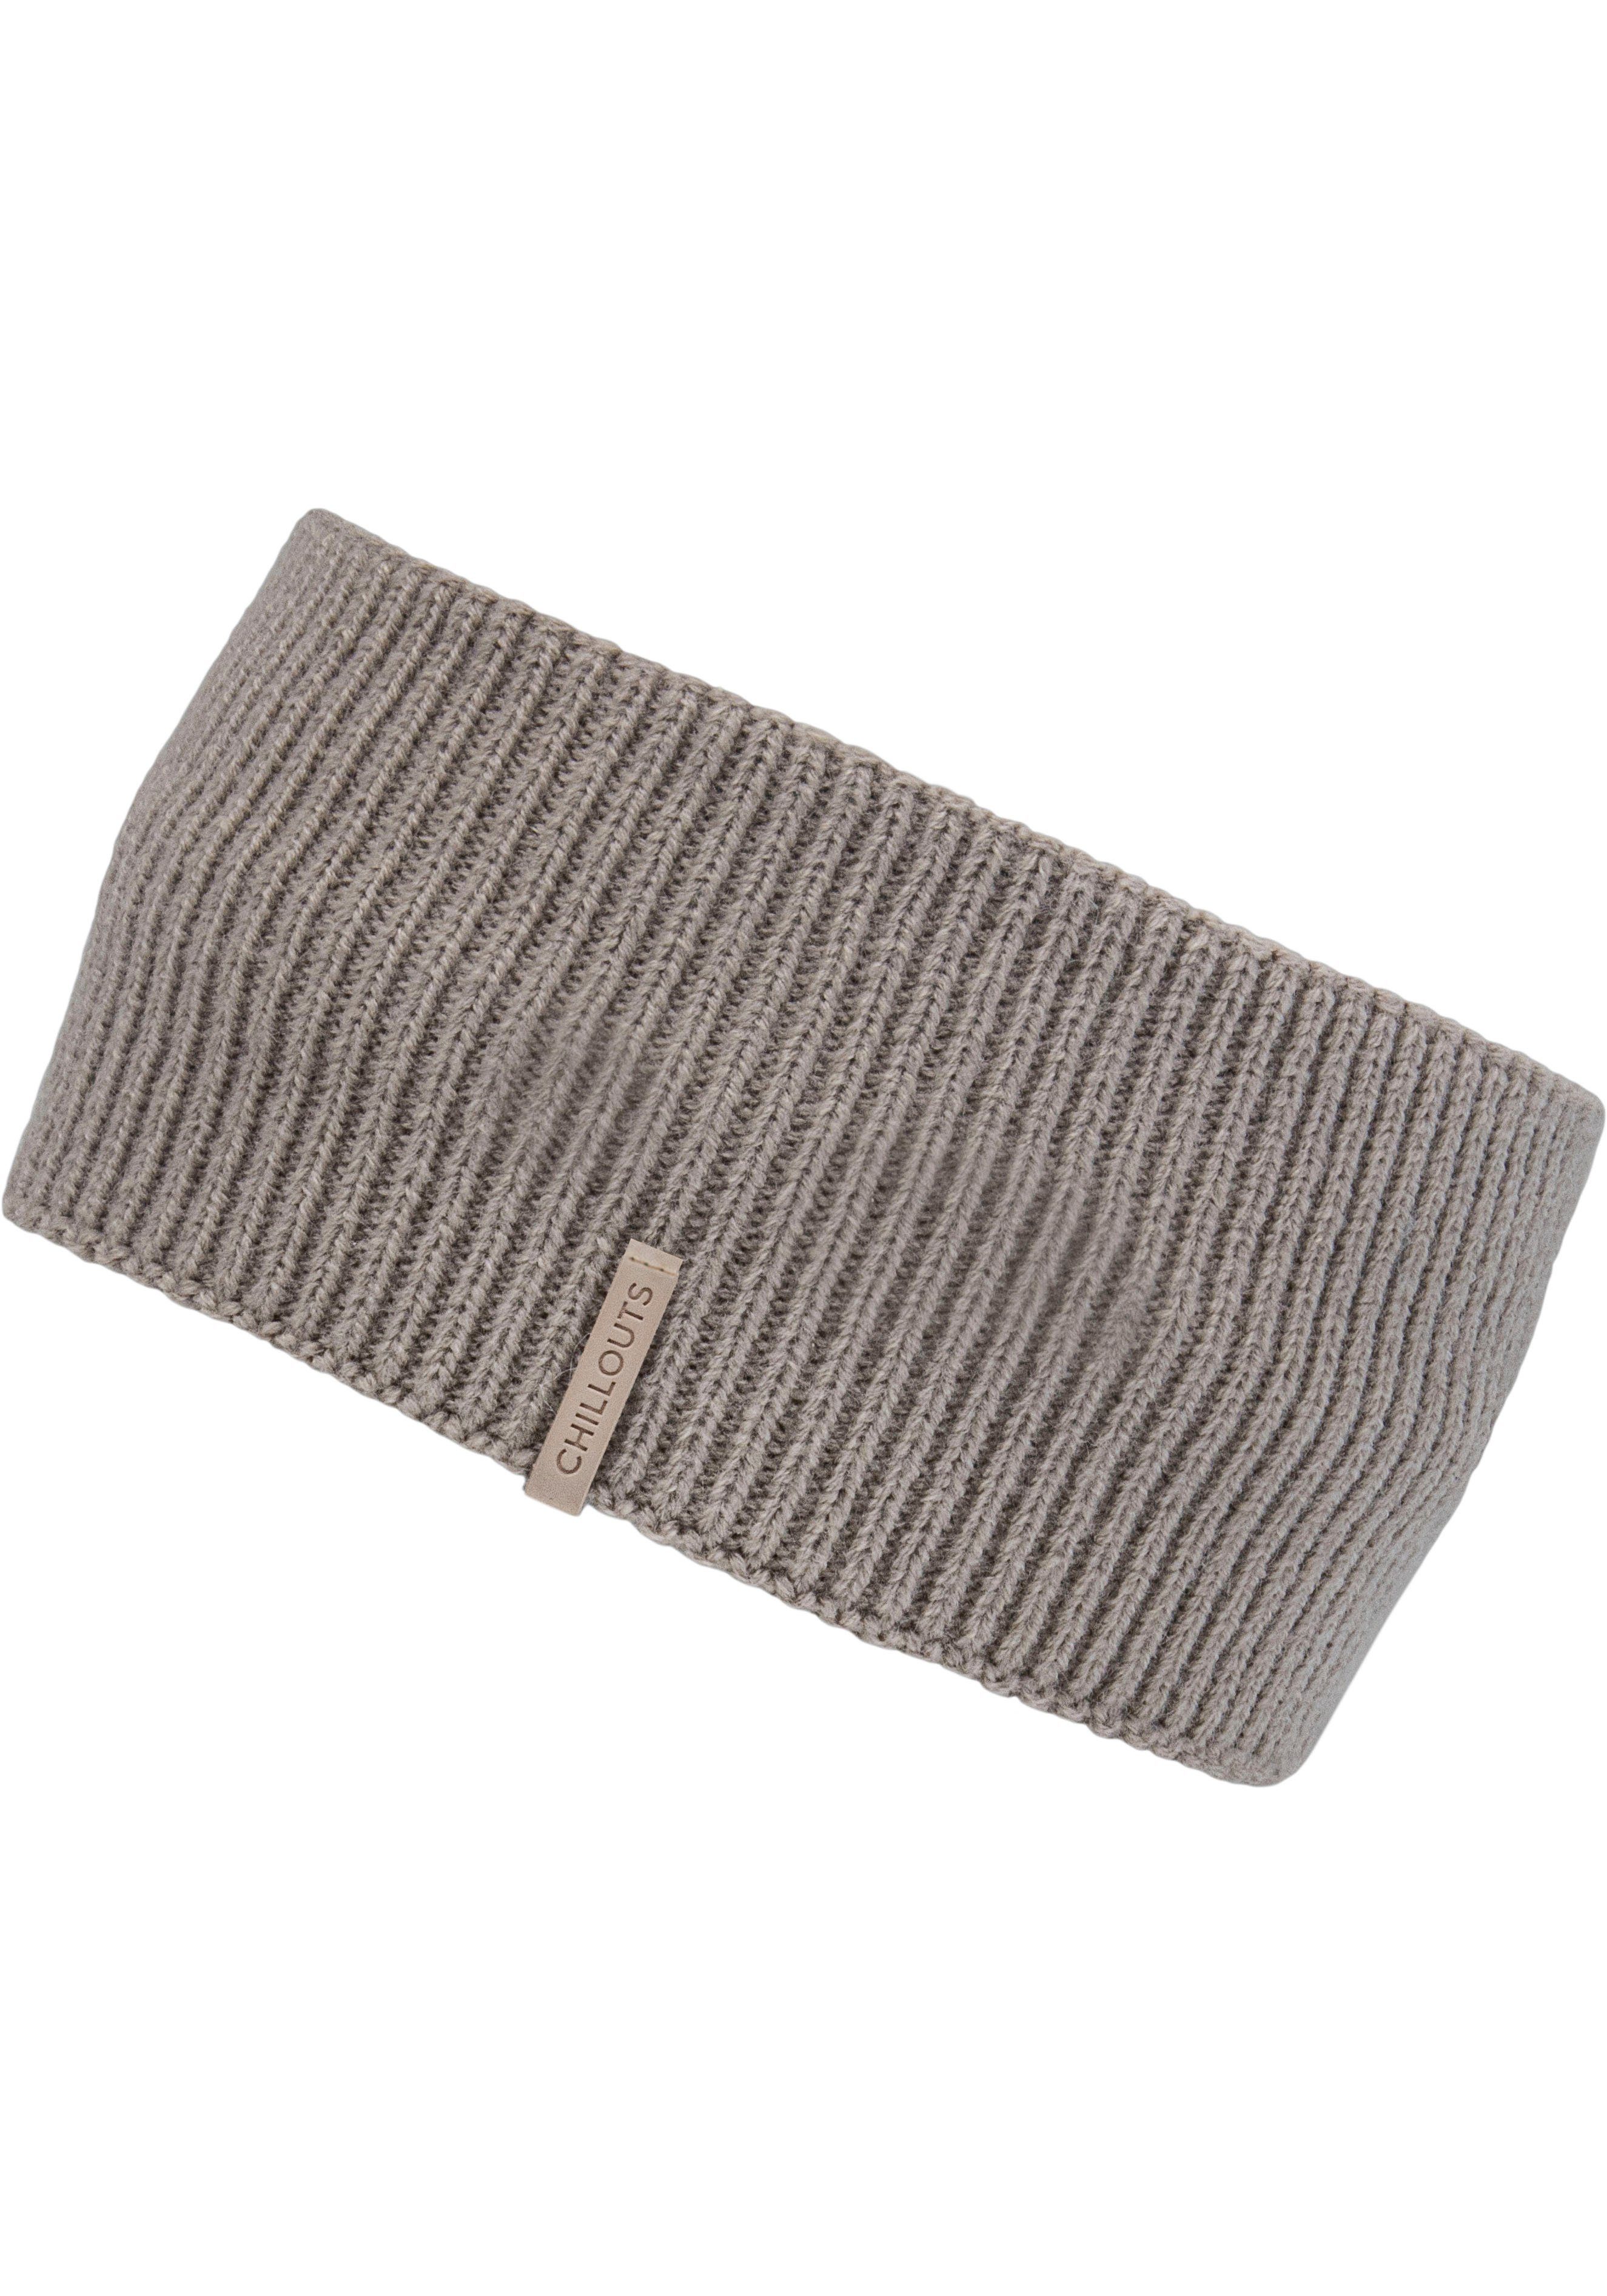 Headband Stirnband chillouts Trendiges taupe Accessoire Ida